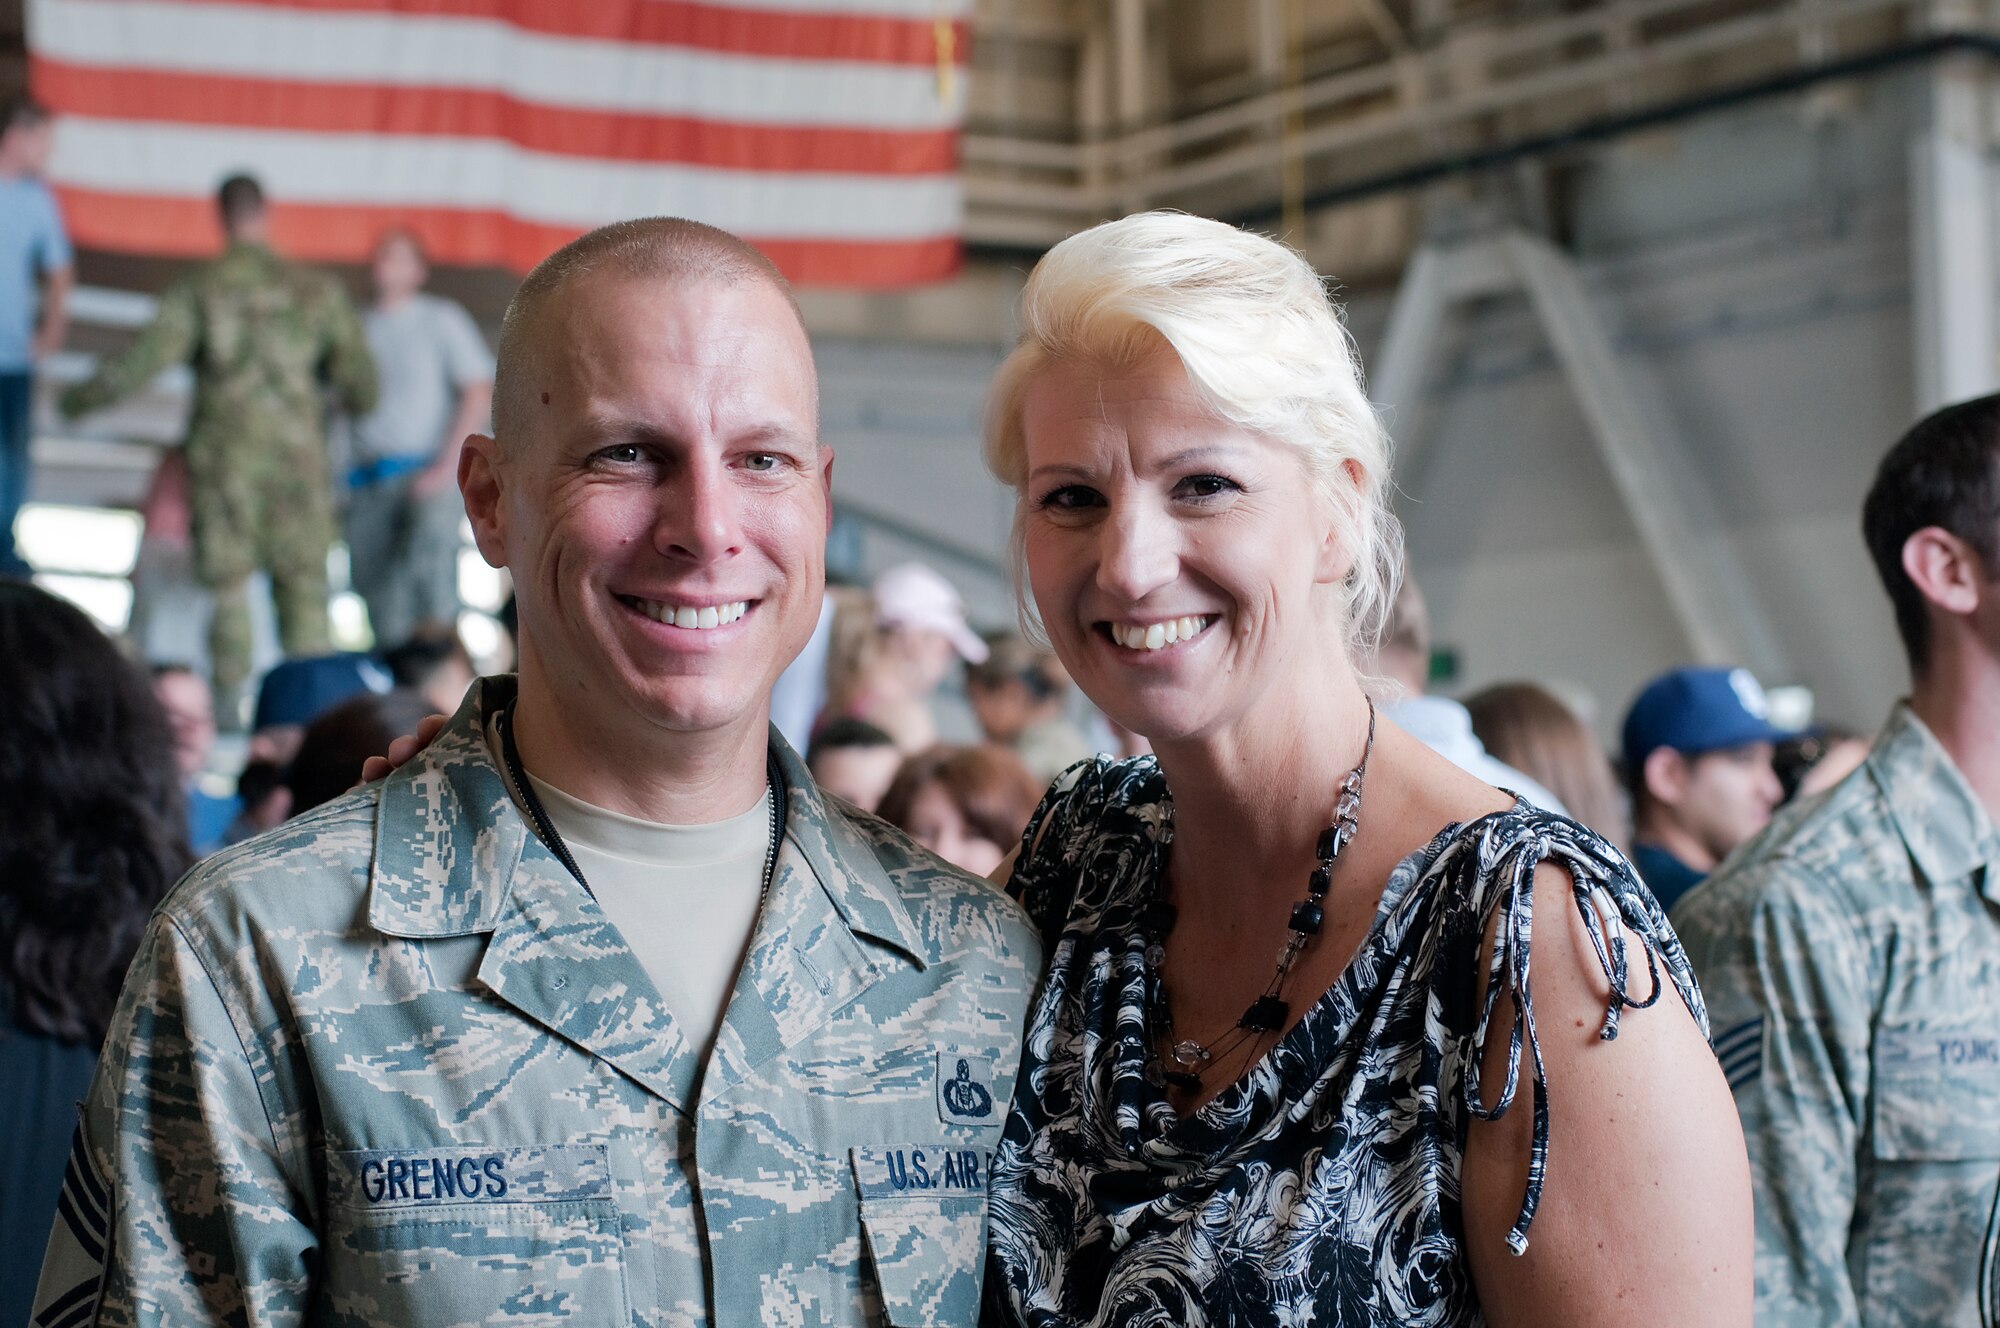 SPANGDAHLEM AIR BASE, Germany- Chief Master Sgt. Matthew Grengs, 52nd Fighter Wing command chief, was welcomed home from his deployment in 2012 by his wife, Estelle.  Chief Grengs has served in the U.S. Air Force for 23 years. (Courtesy photo/Released)
